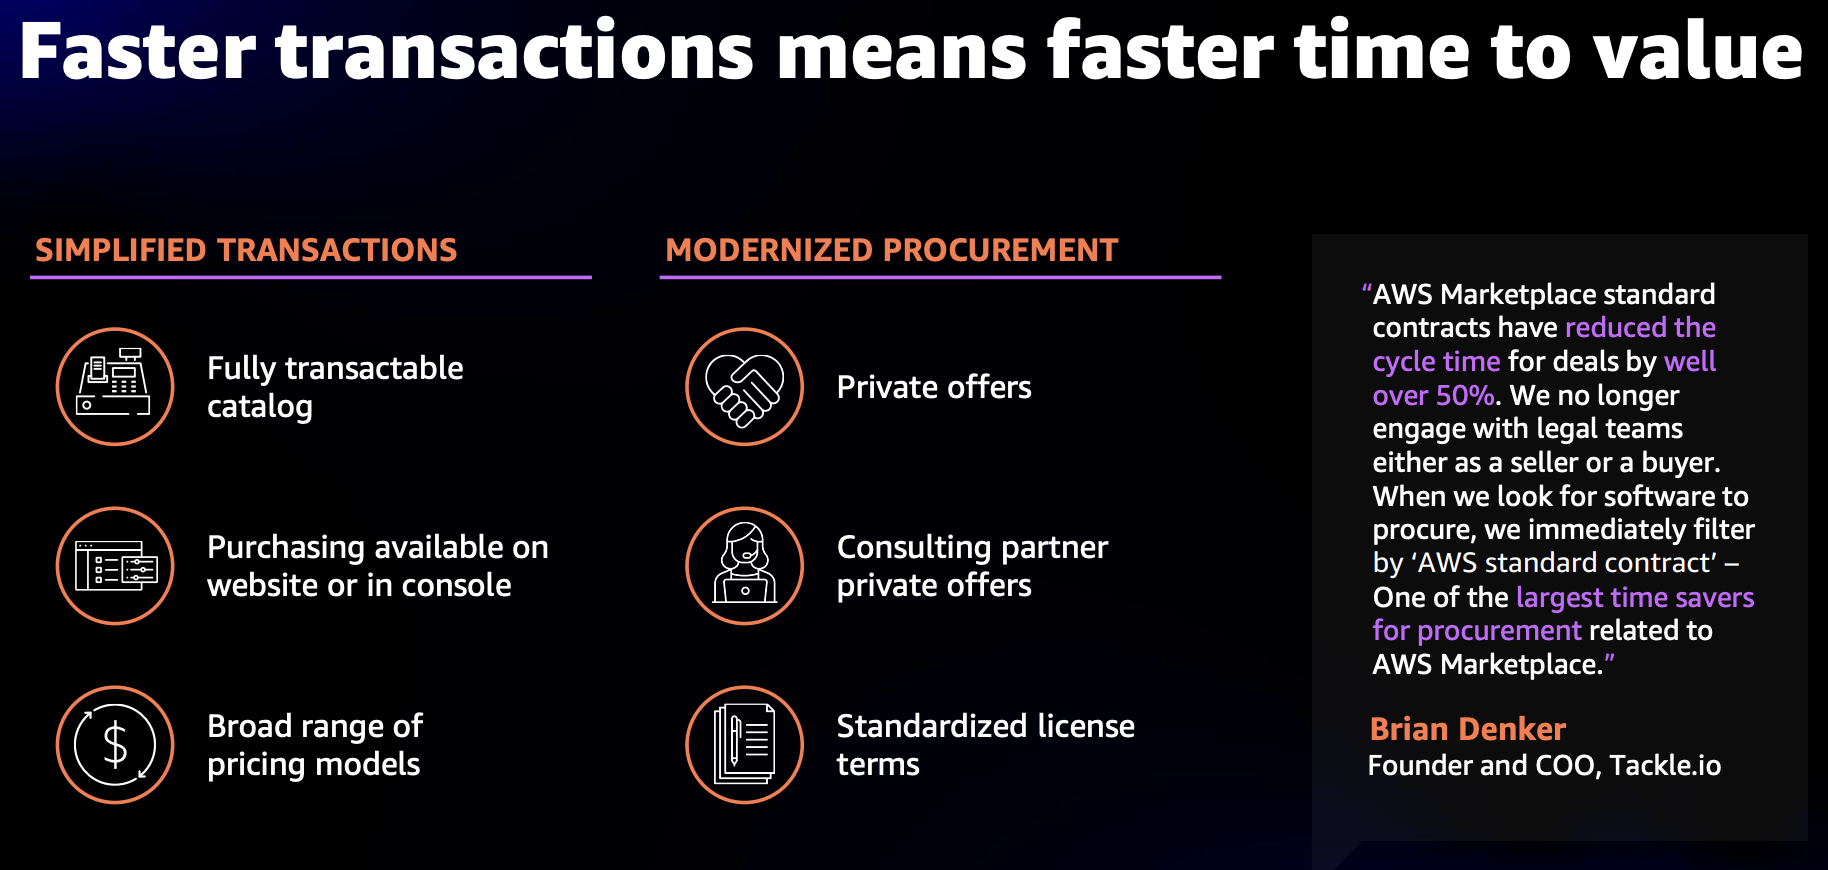 Faster transactions means faster time to value